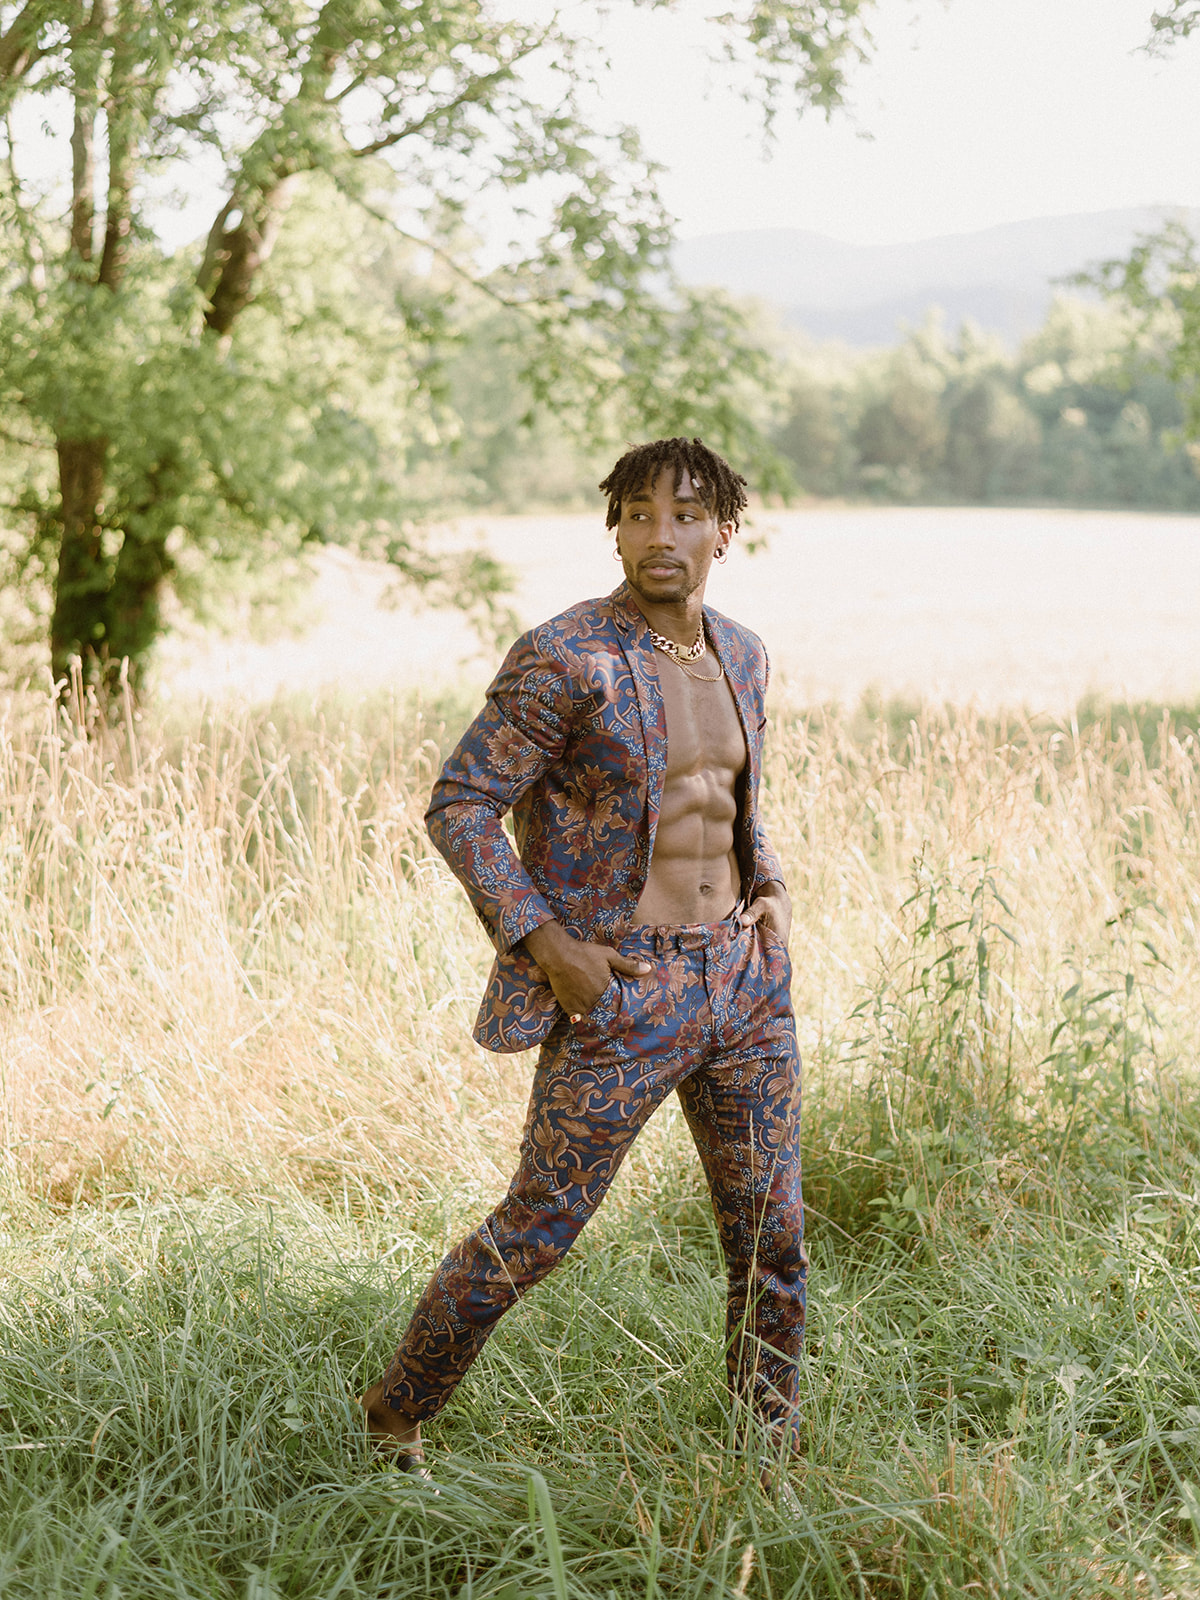 editorial photoshoot featuring a male model in a striking muted floral suit, baring his fit physique amidst nature's can